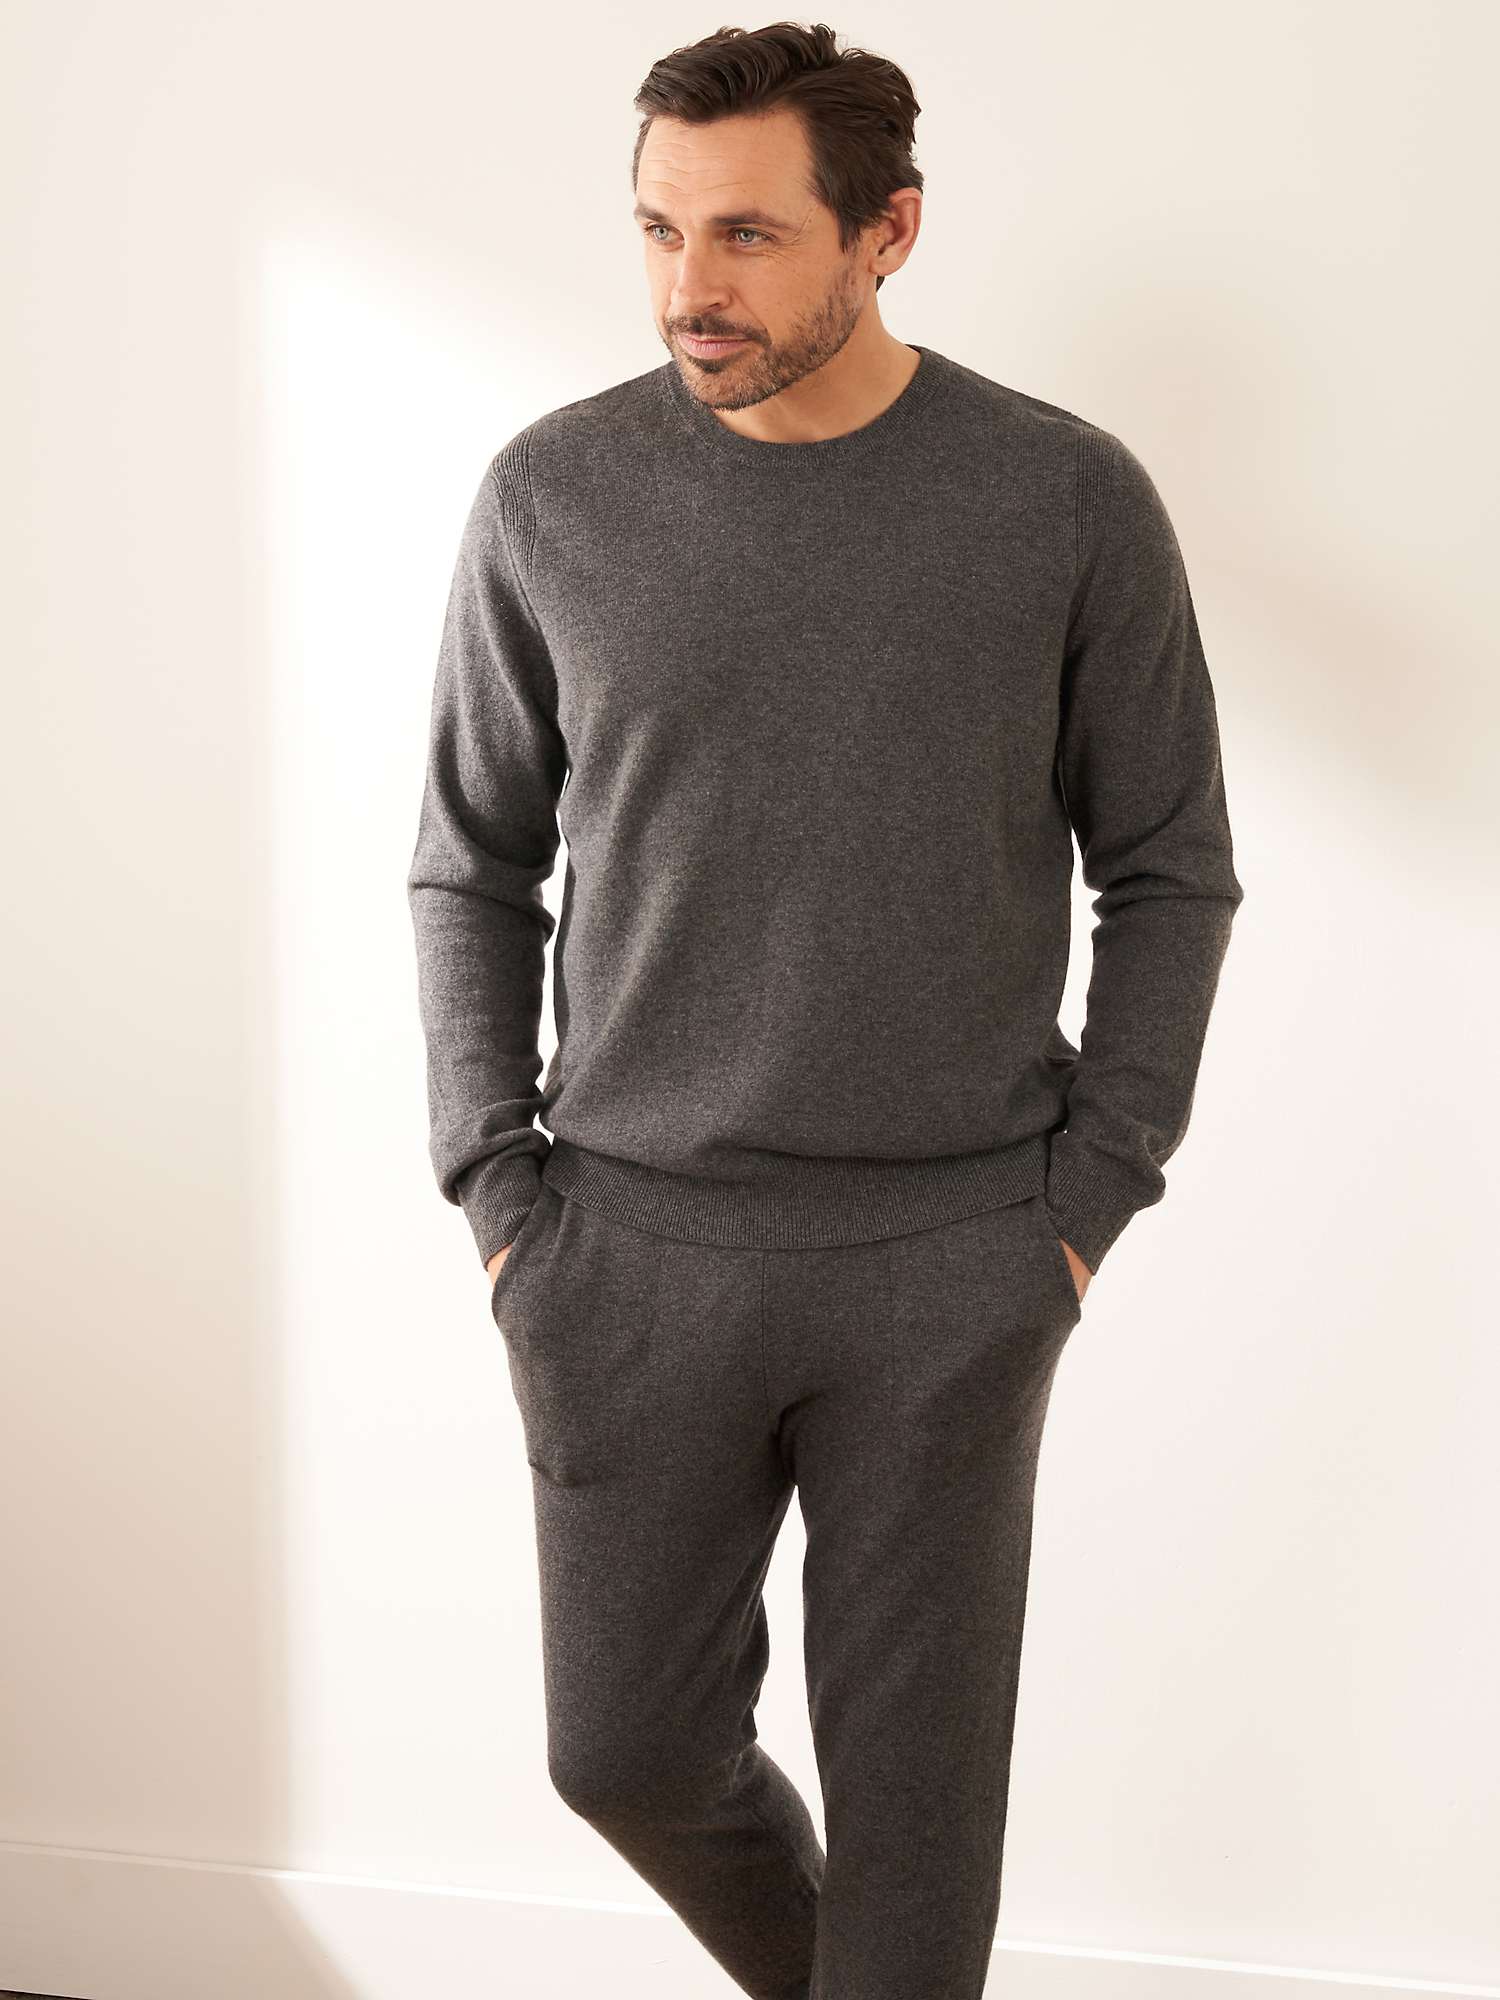 Buy Truly Cashmere Crew Neck Jumper, Charcoal Marl Online at johnlewis.com